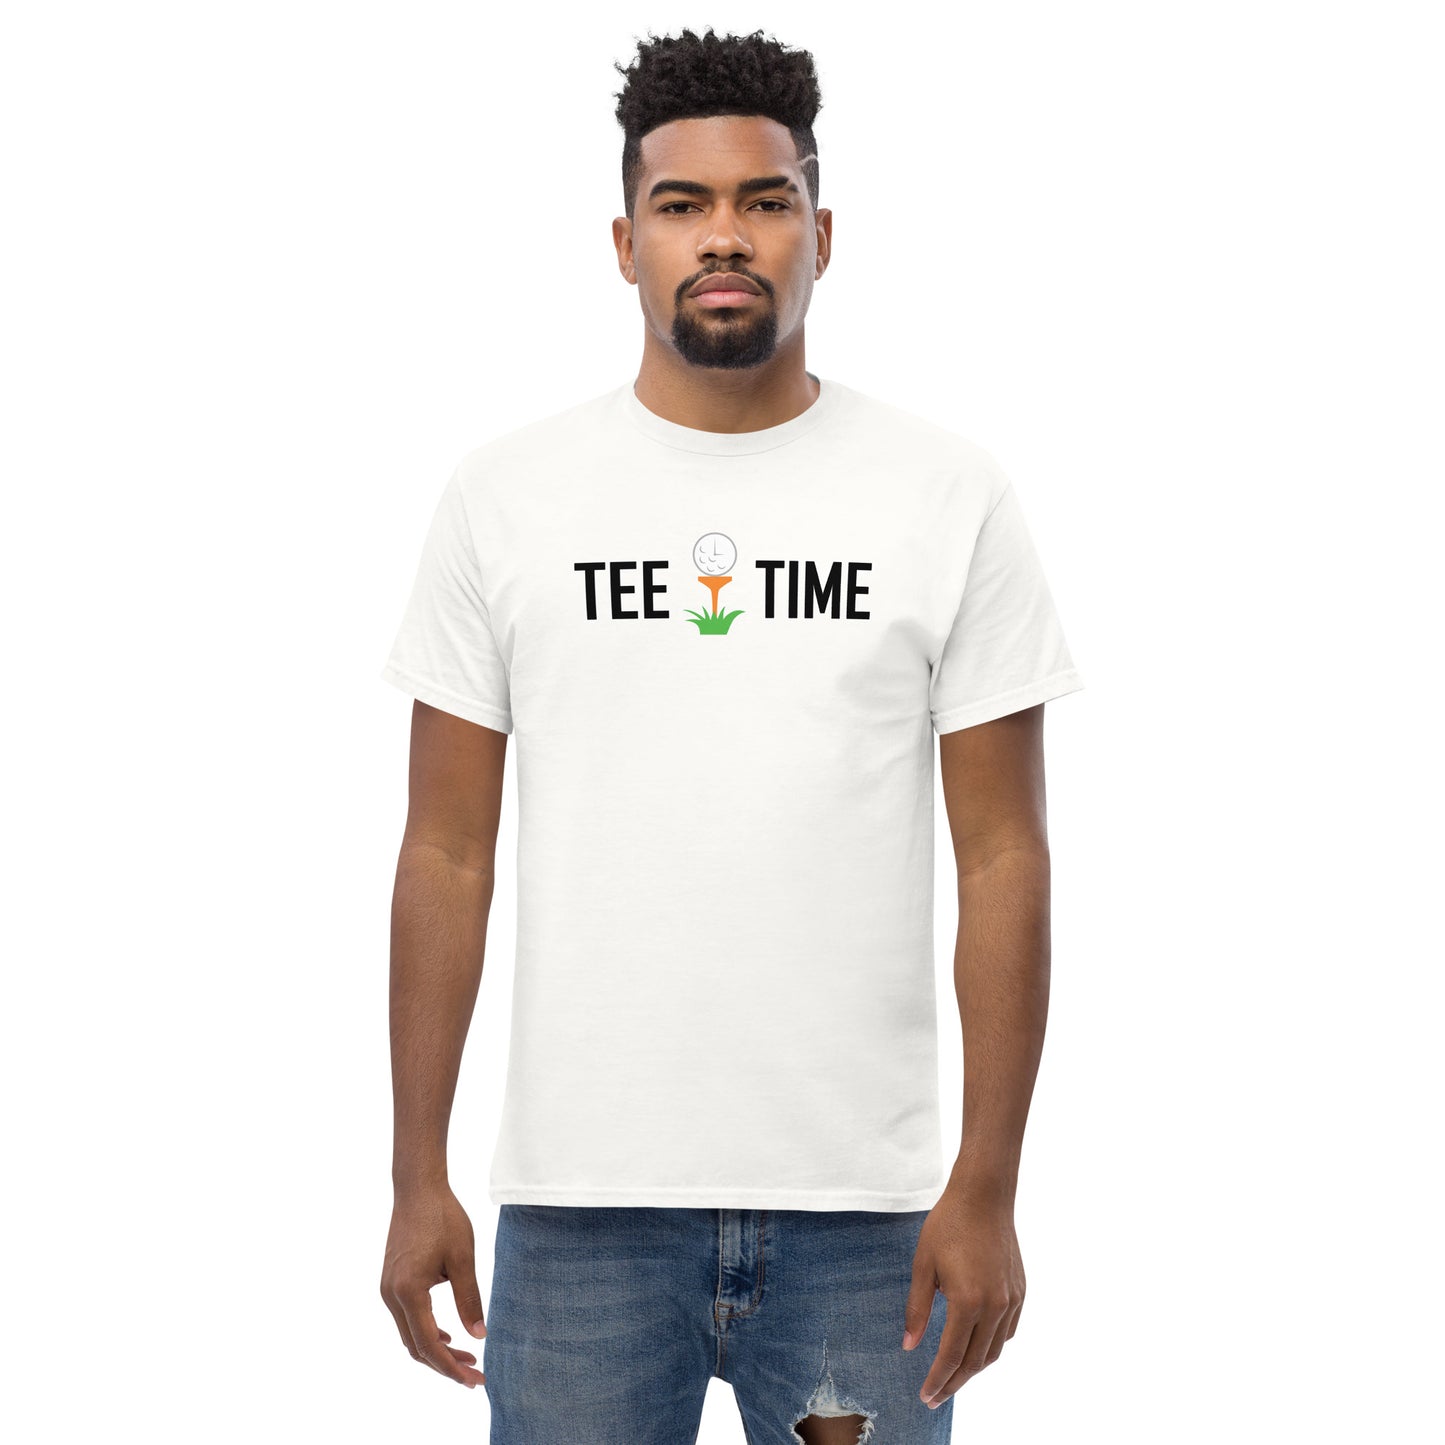 The image shows a man facing forward wearing a plain white t-shirt with a graphic and text. The graphic is centered on the chest area and depicts a golf tee with a golf ball on top; growing from the tee is a small green plant. Above the graphic, the text reads "TEE TIME" in black capital letters. The man has short curly hair, a neatly trimmed beard, and a neutral expression. He is wearing blue jeans and the background is plain white, focusing all attention on the t-shirt design. 